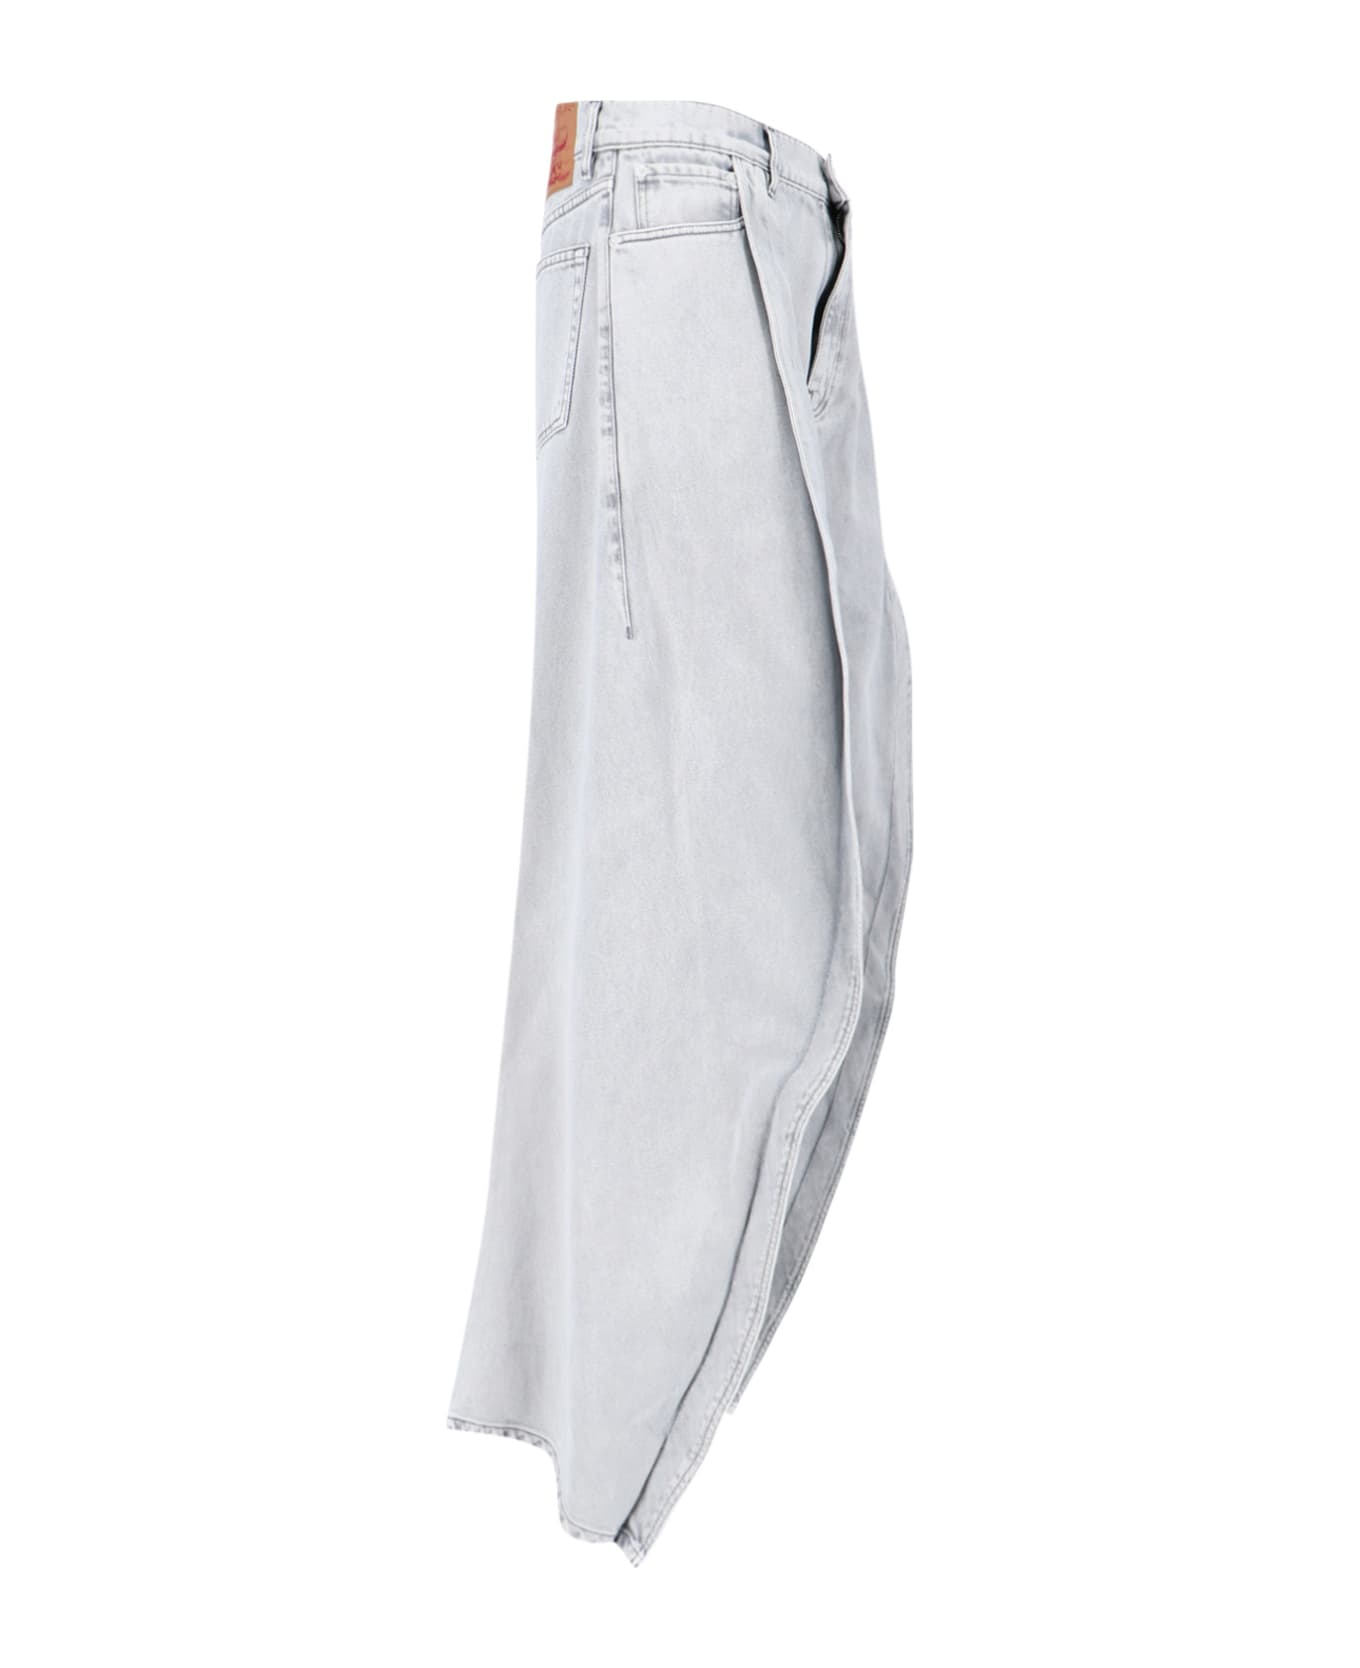 Y/Project 'banana' Jeans - Gray